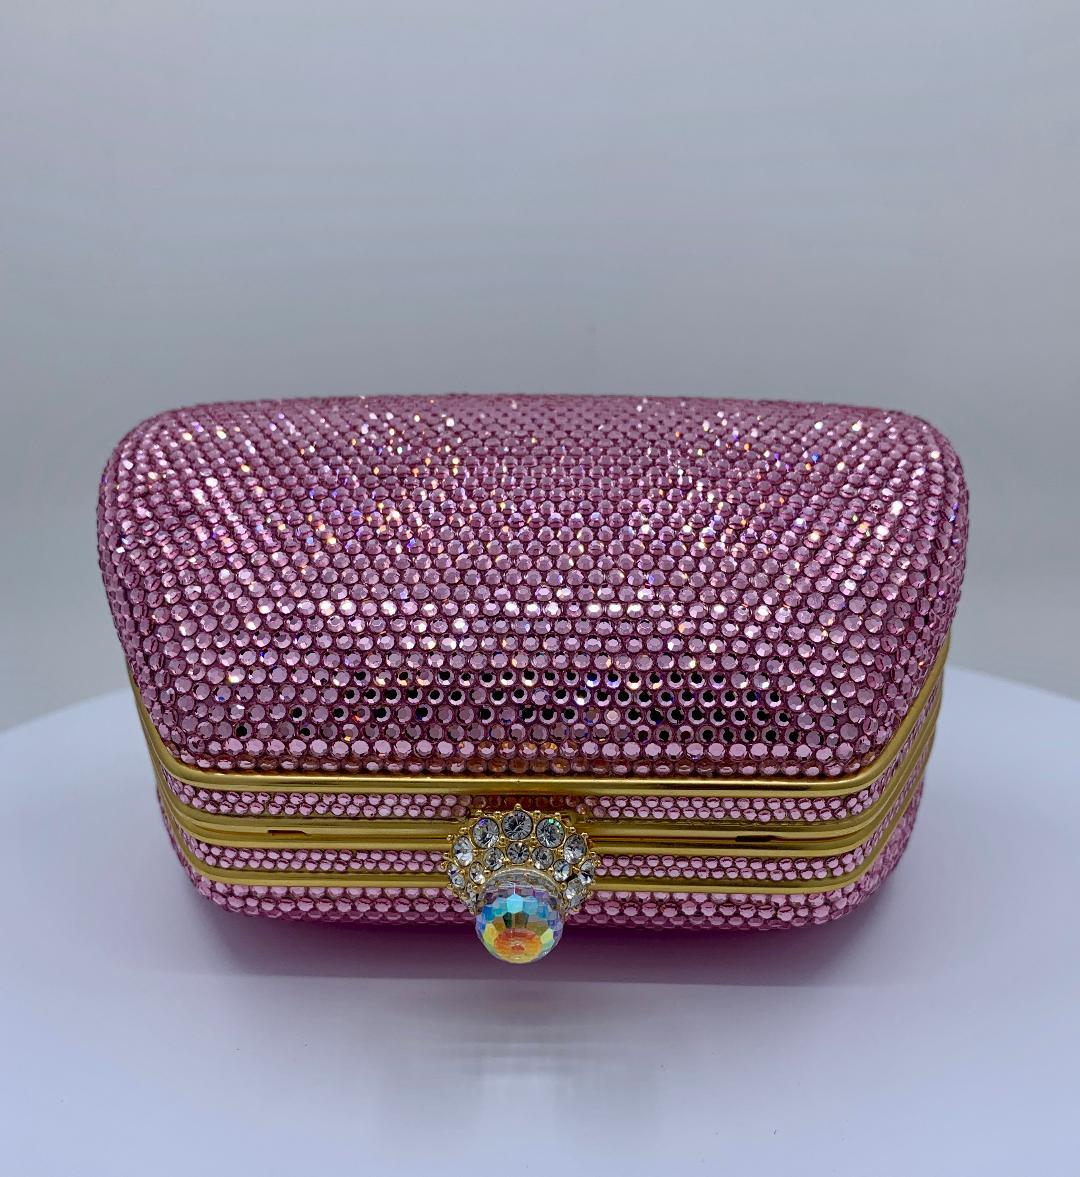 Glistening Judith Leiber Pink Crystal Minaudiere Evening Bag With Shoulder Chain 7